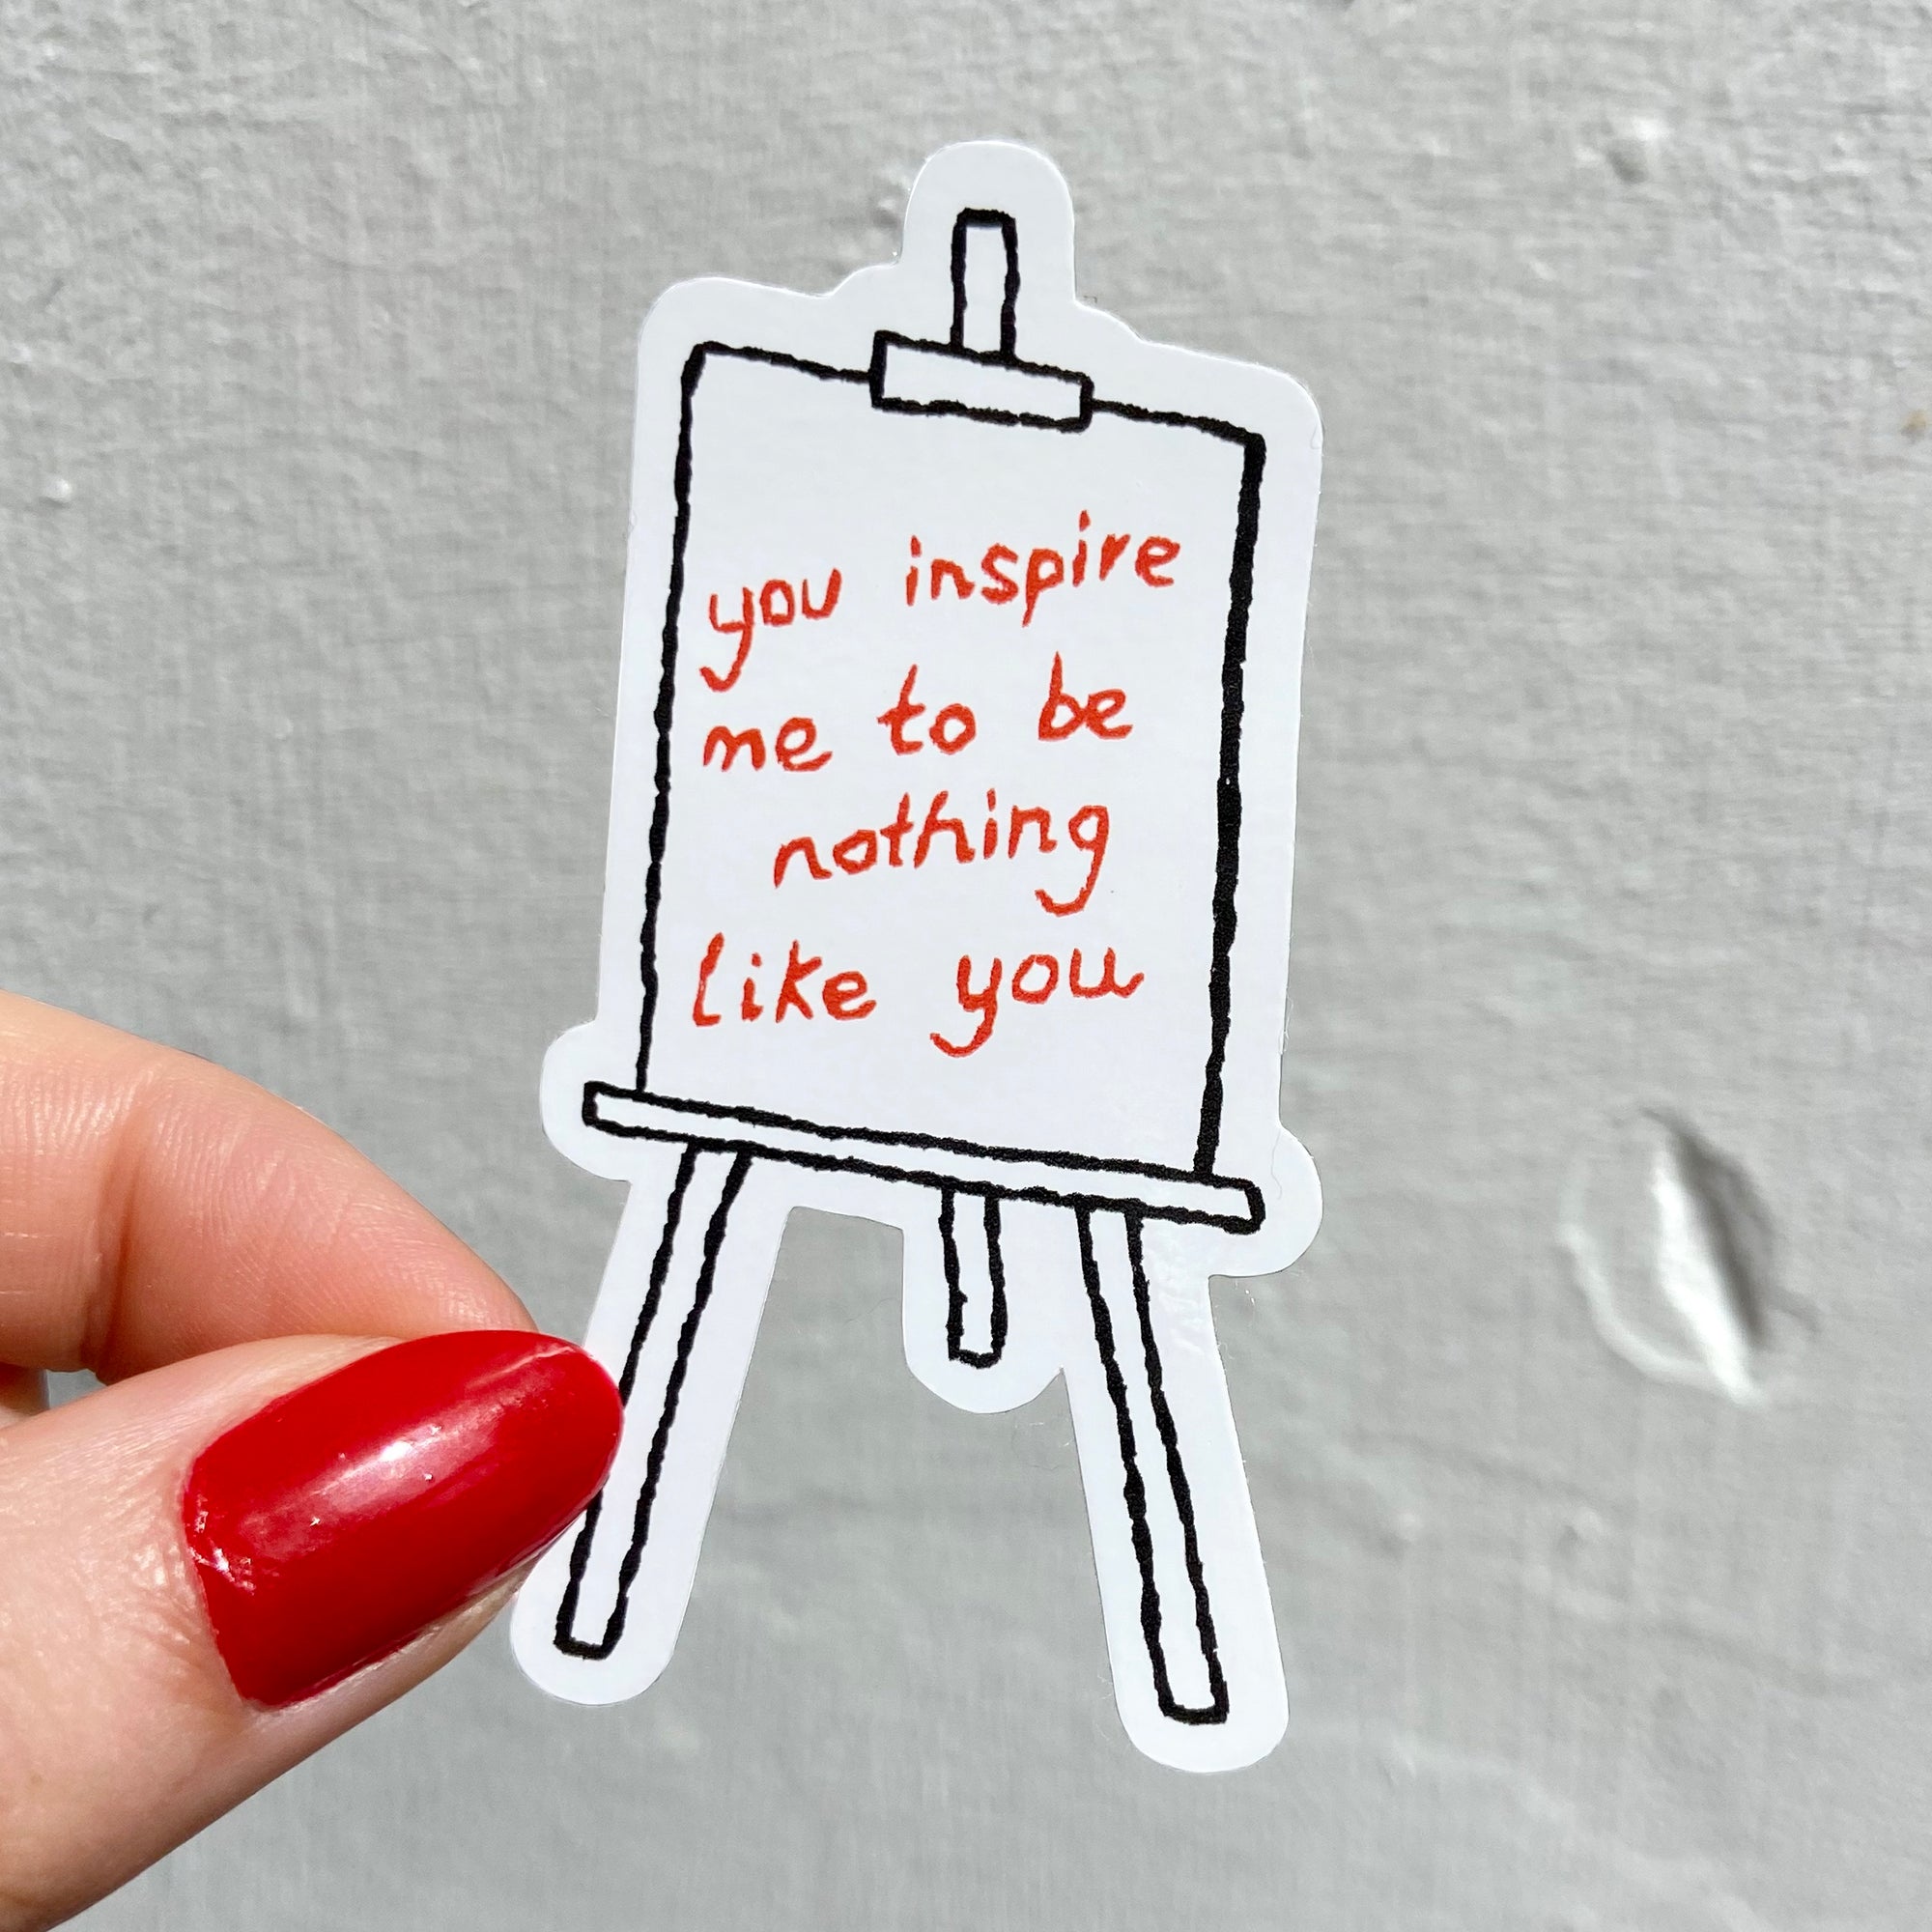 YOU INSPIRE ME TO BE NOTHING LIKE YOU (STICKER)